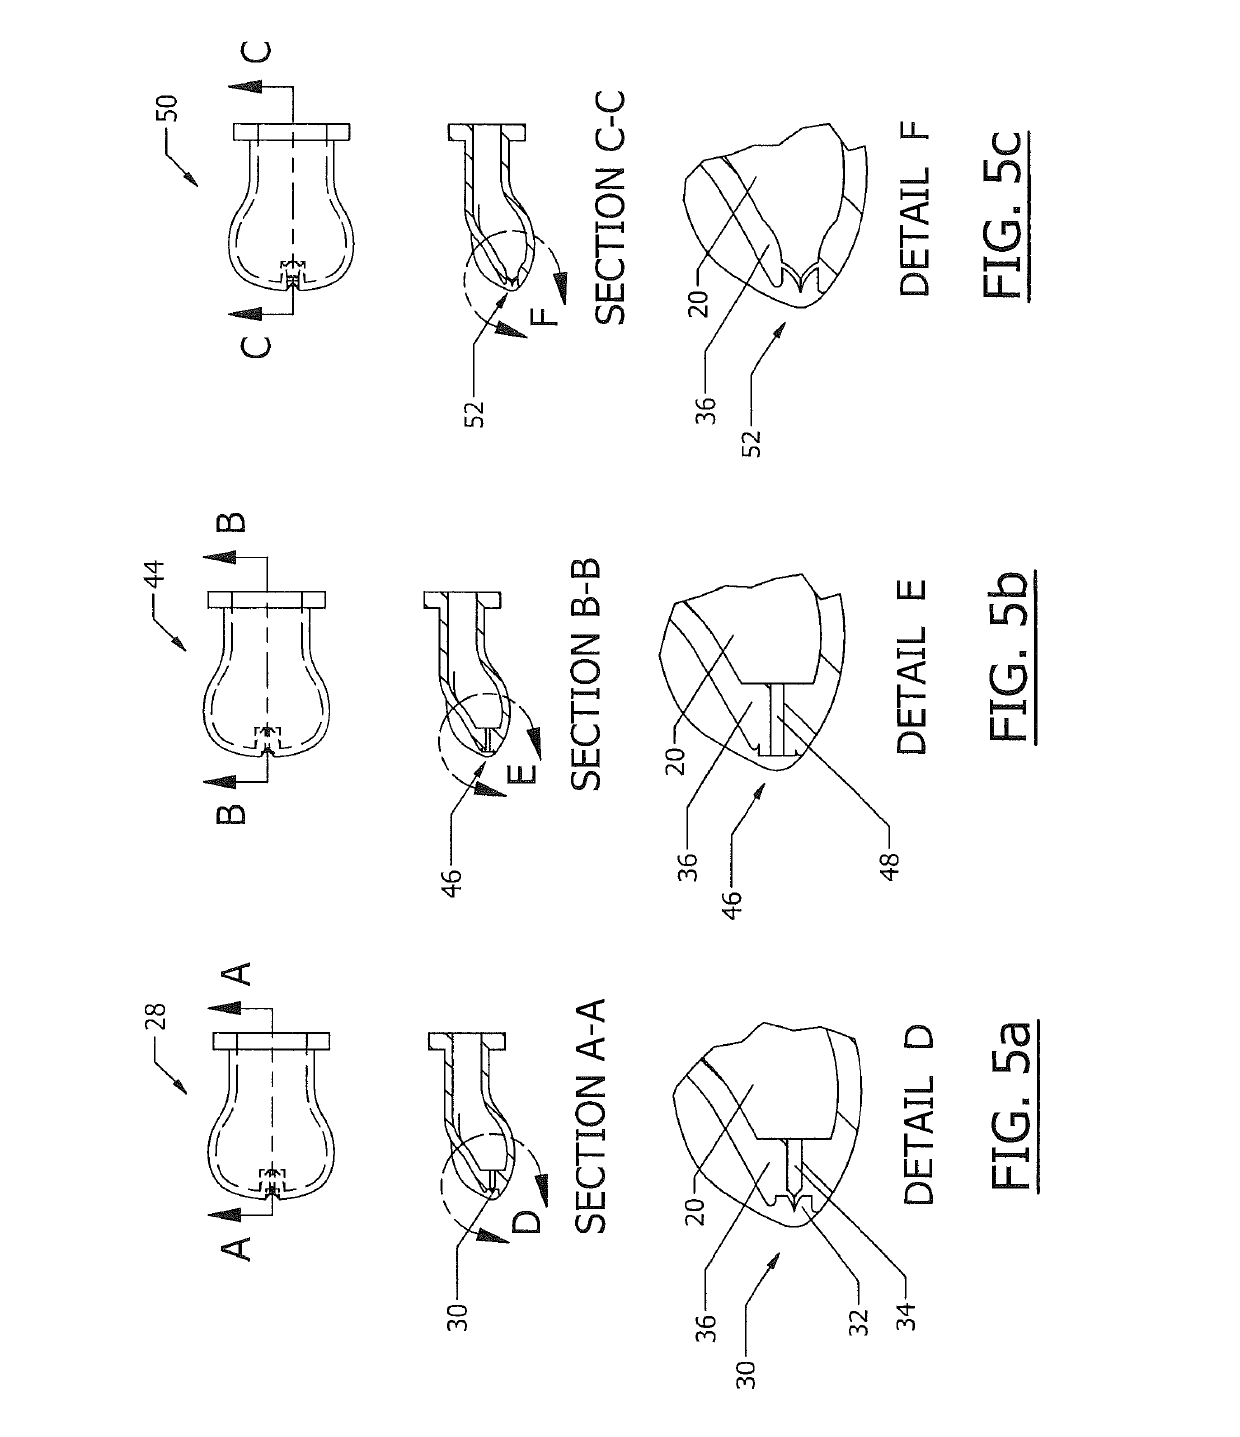 Flow-controlling pacifier weaning apparatus